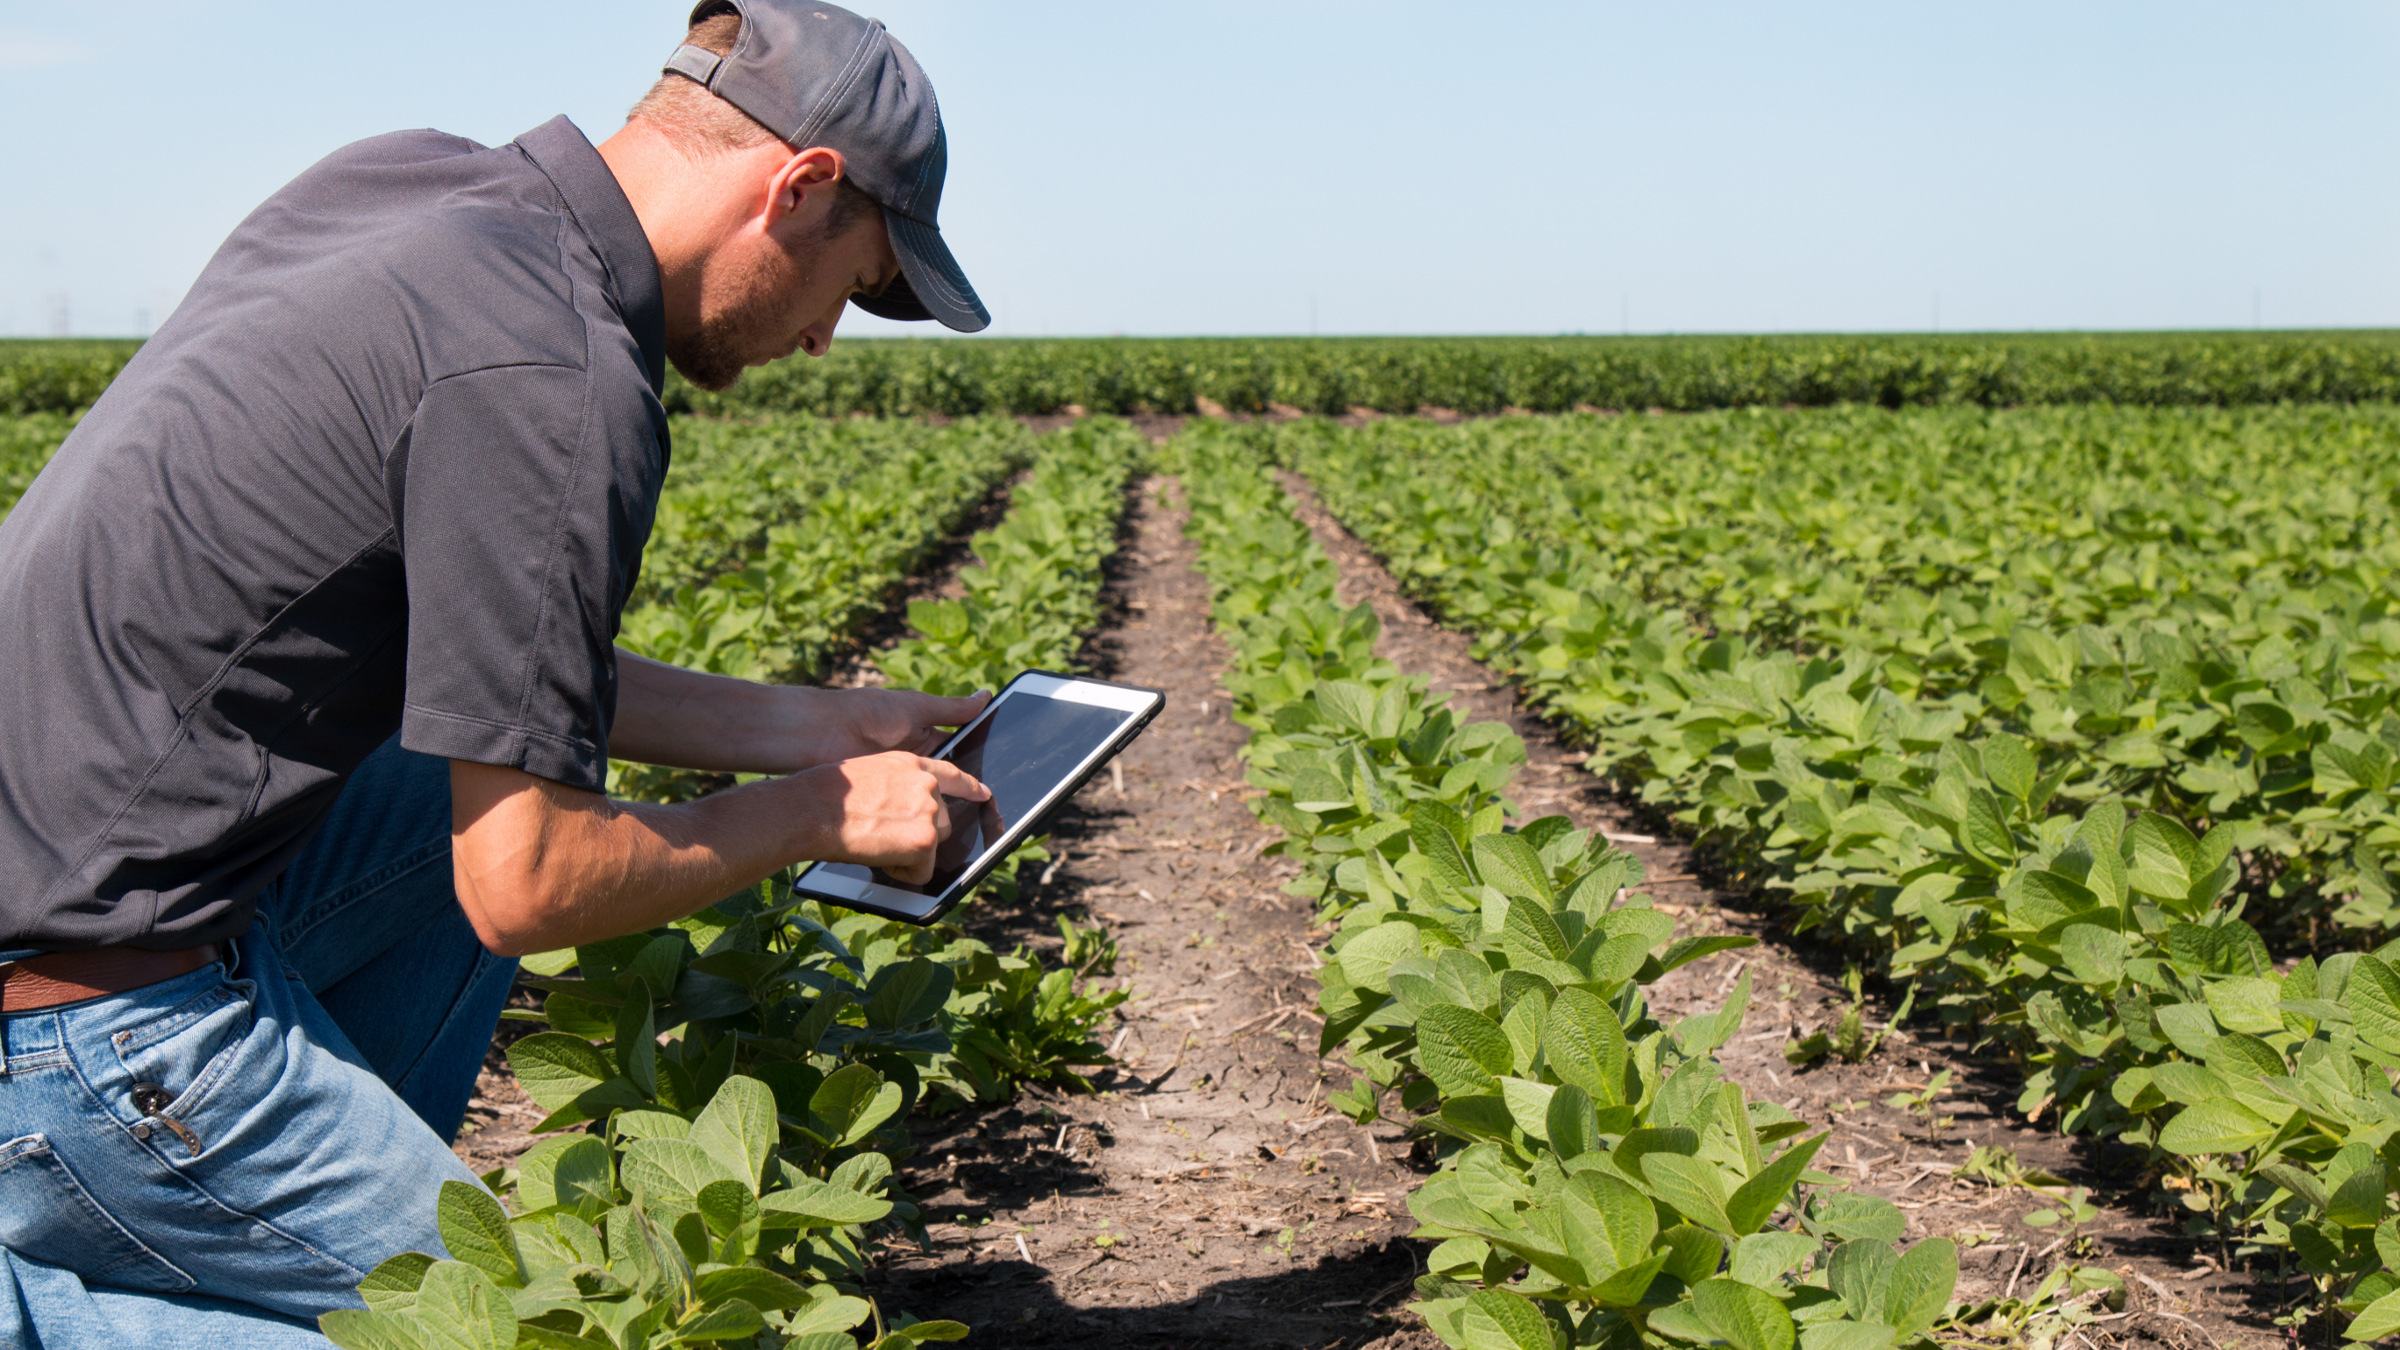 Credit: Shutterstock man using a tablet in an agricultural field